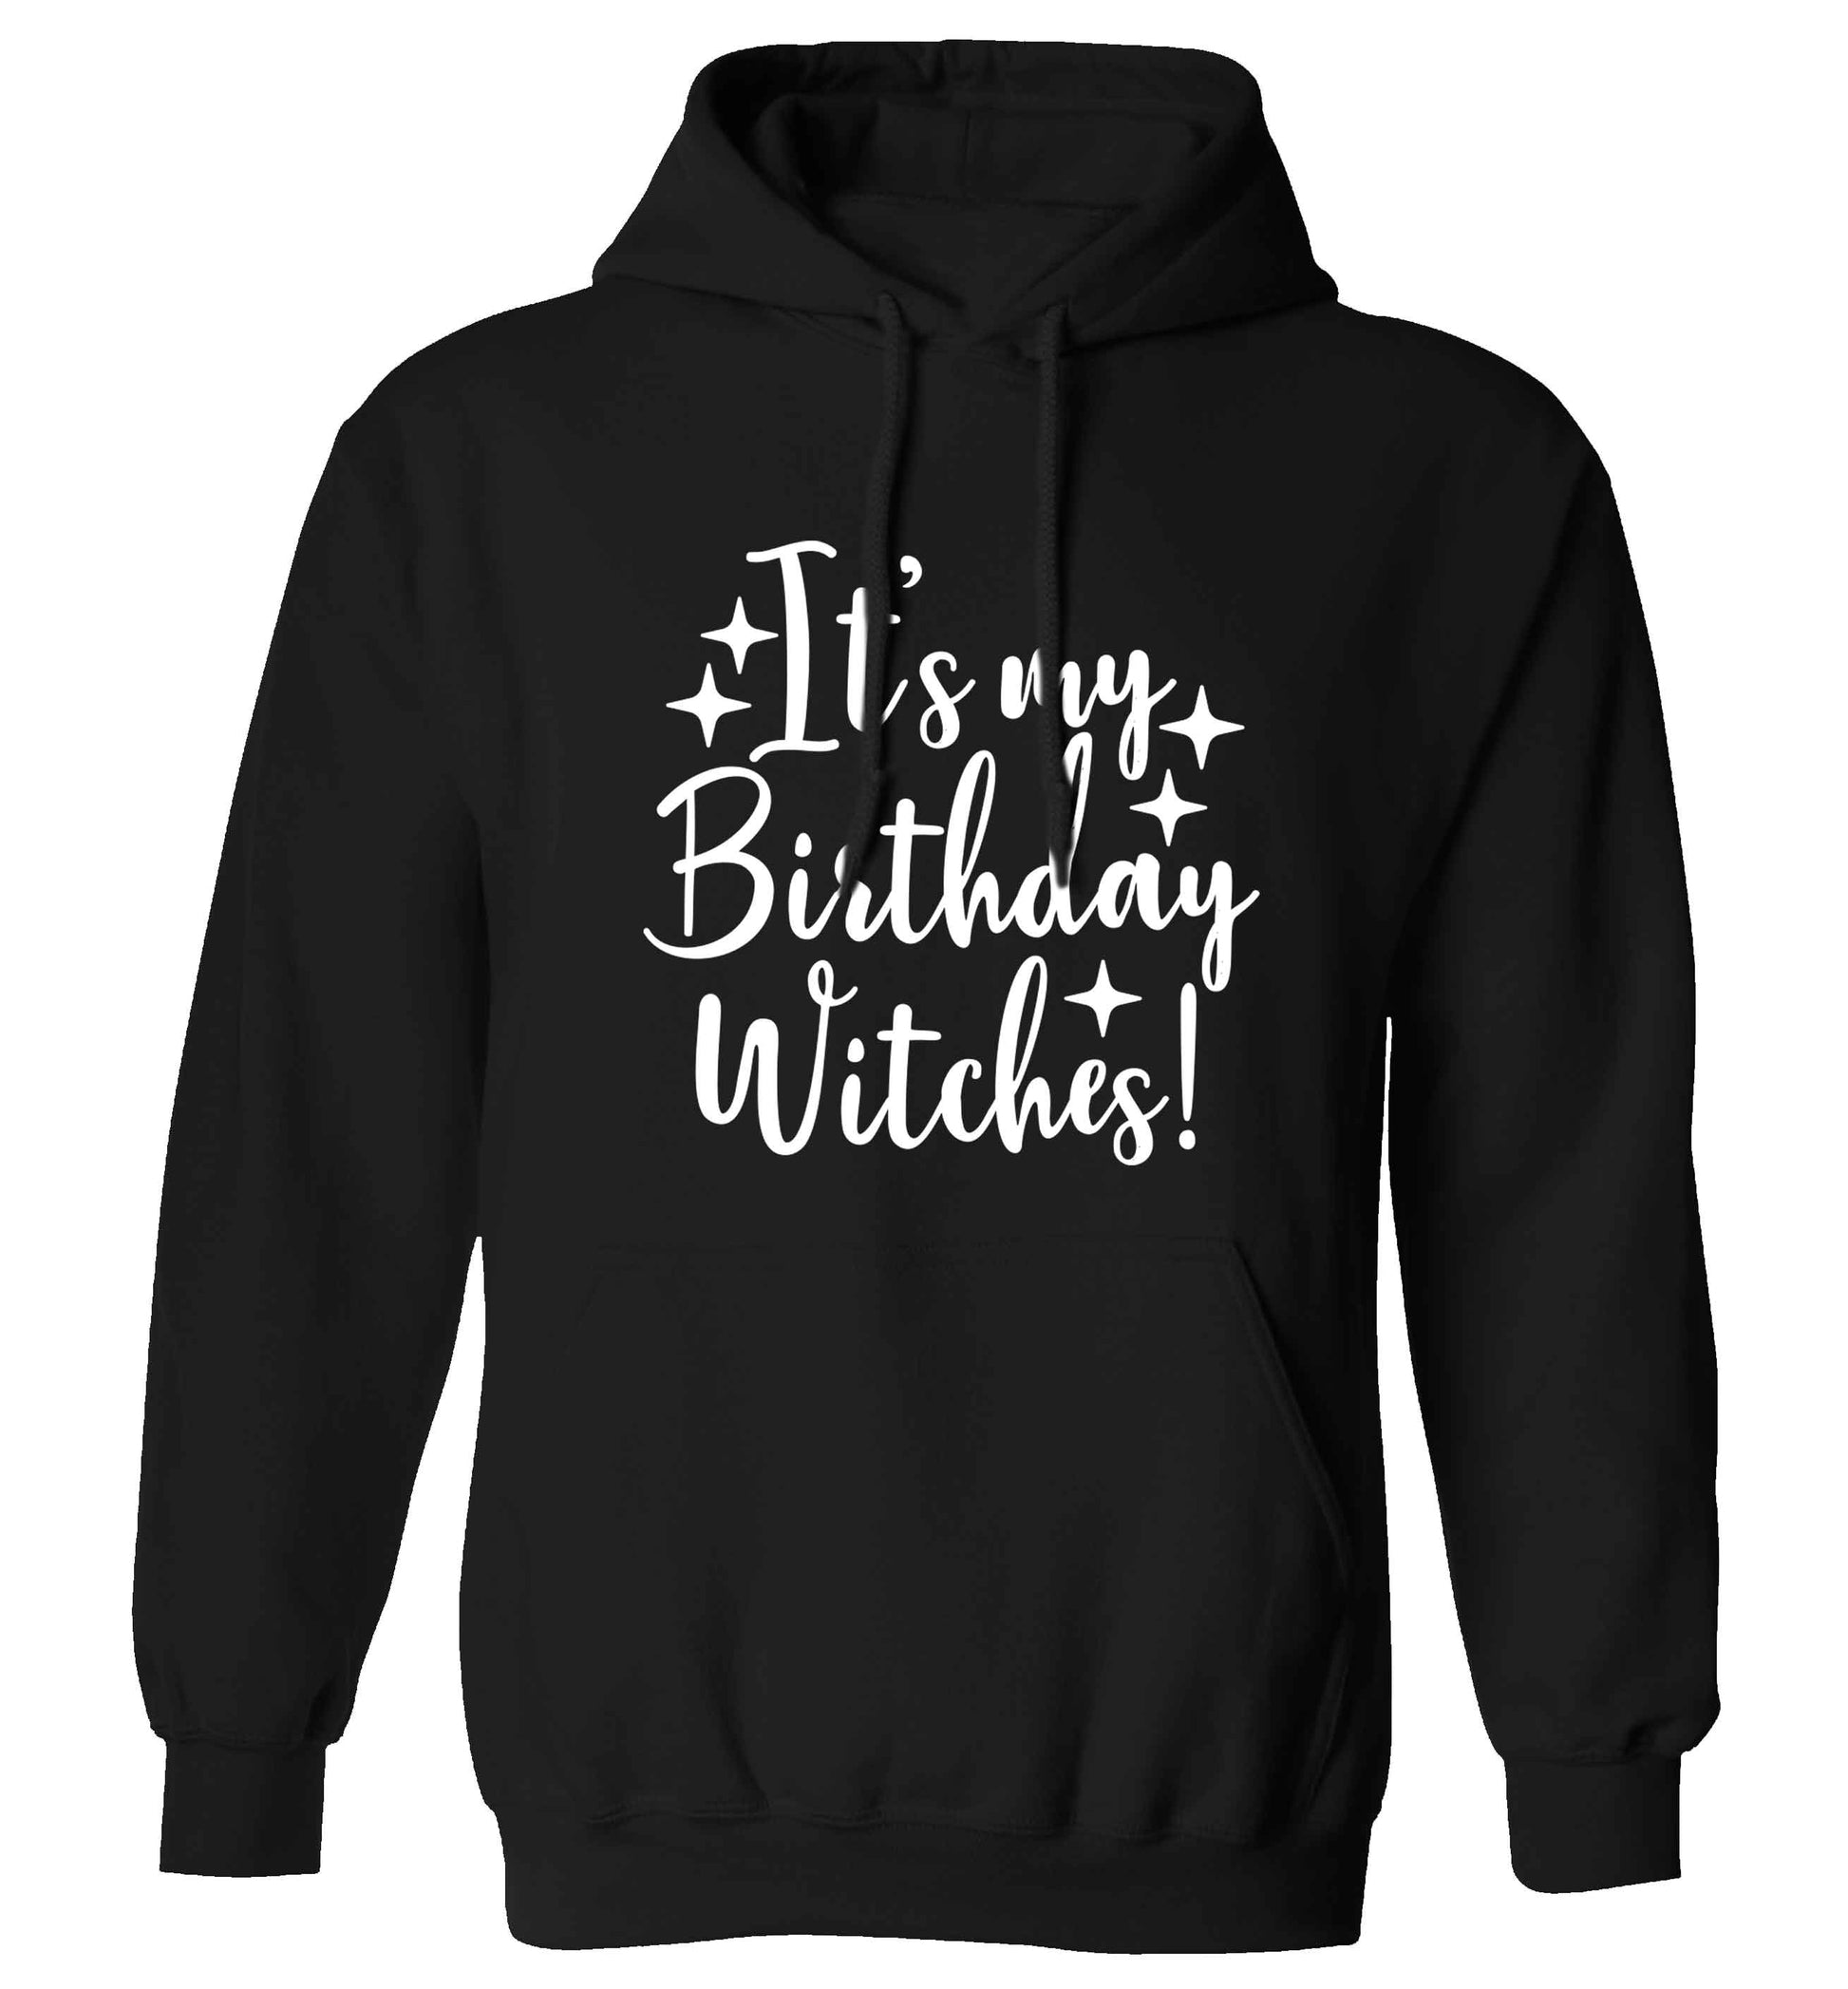 It's my birthday witches!adults unisex black hoodie 2XL